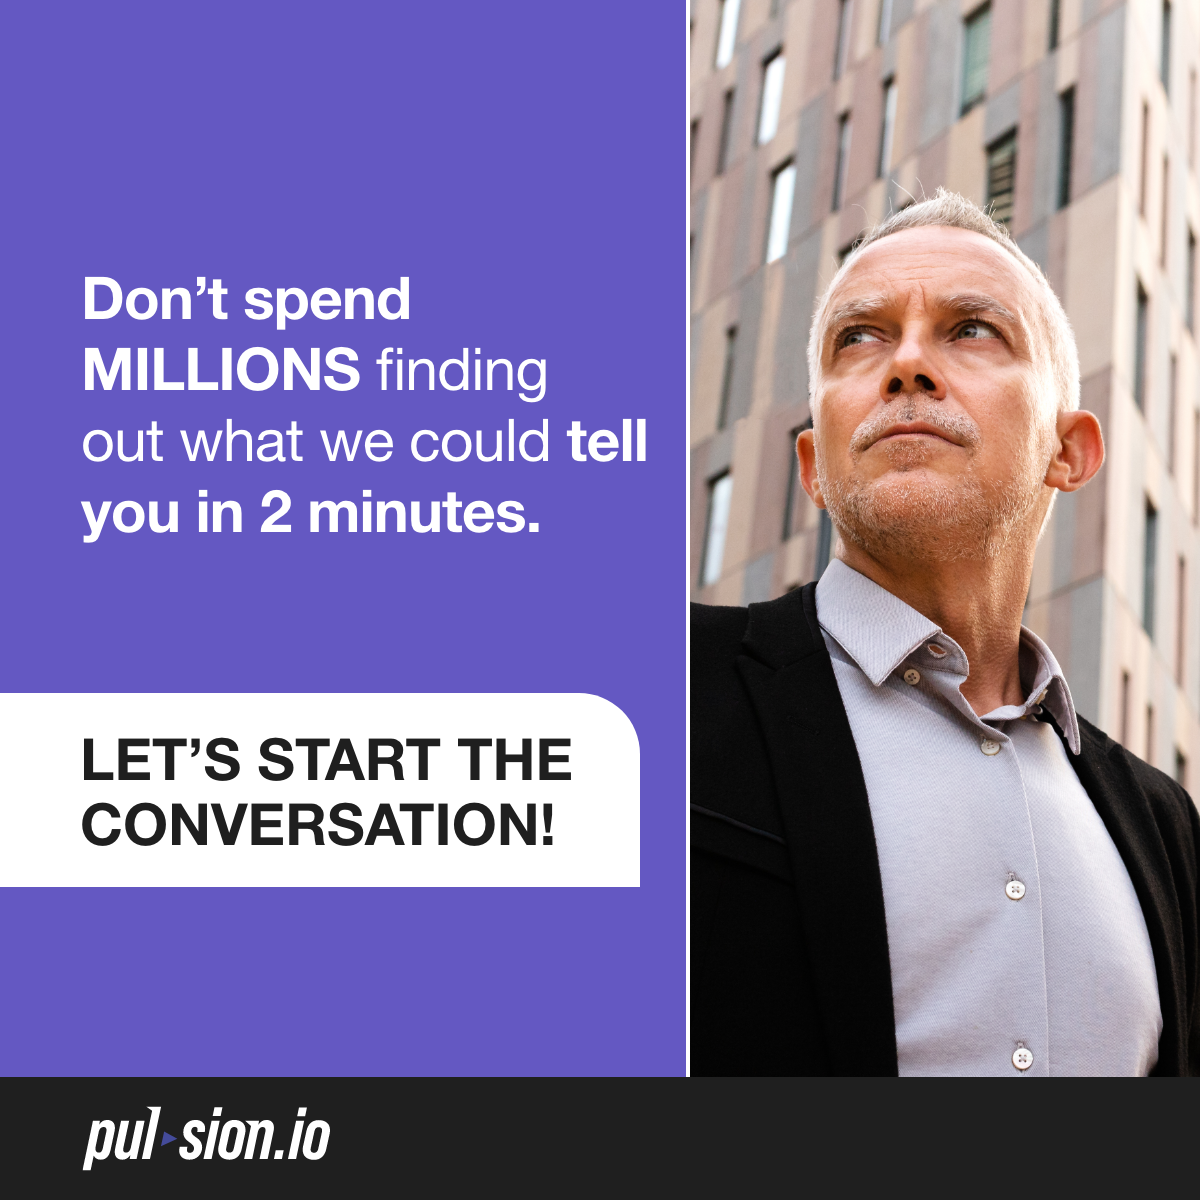 Don't spend millions finding out what we can tell you in 2-minutes.